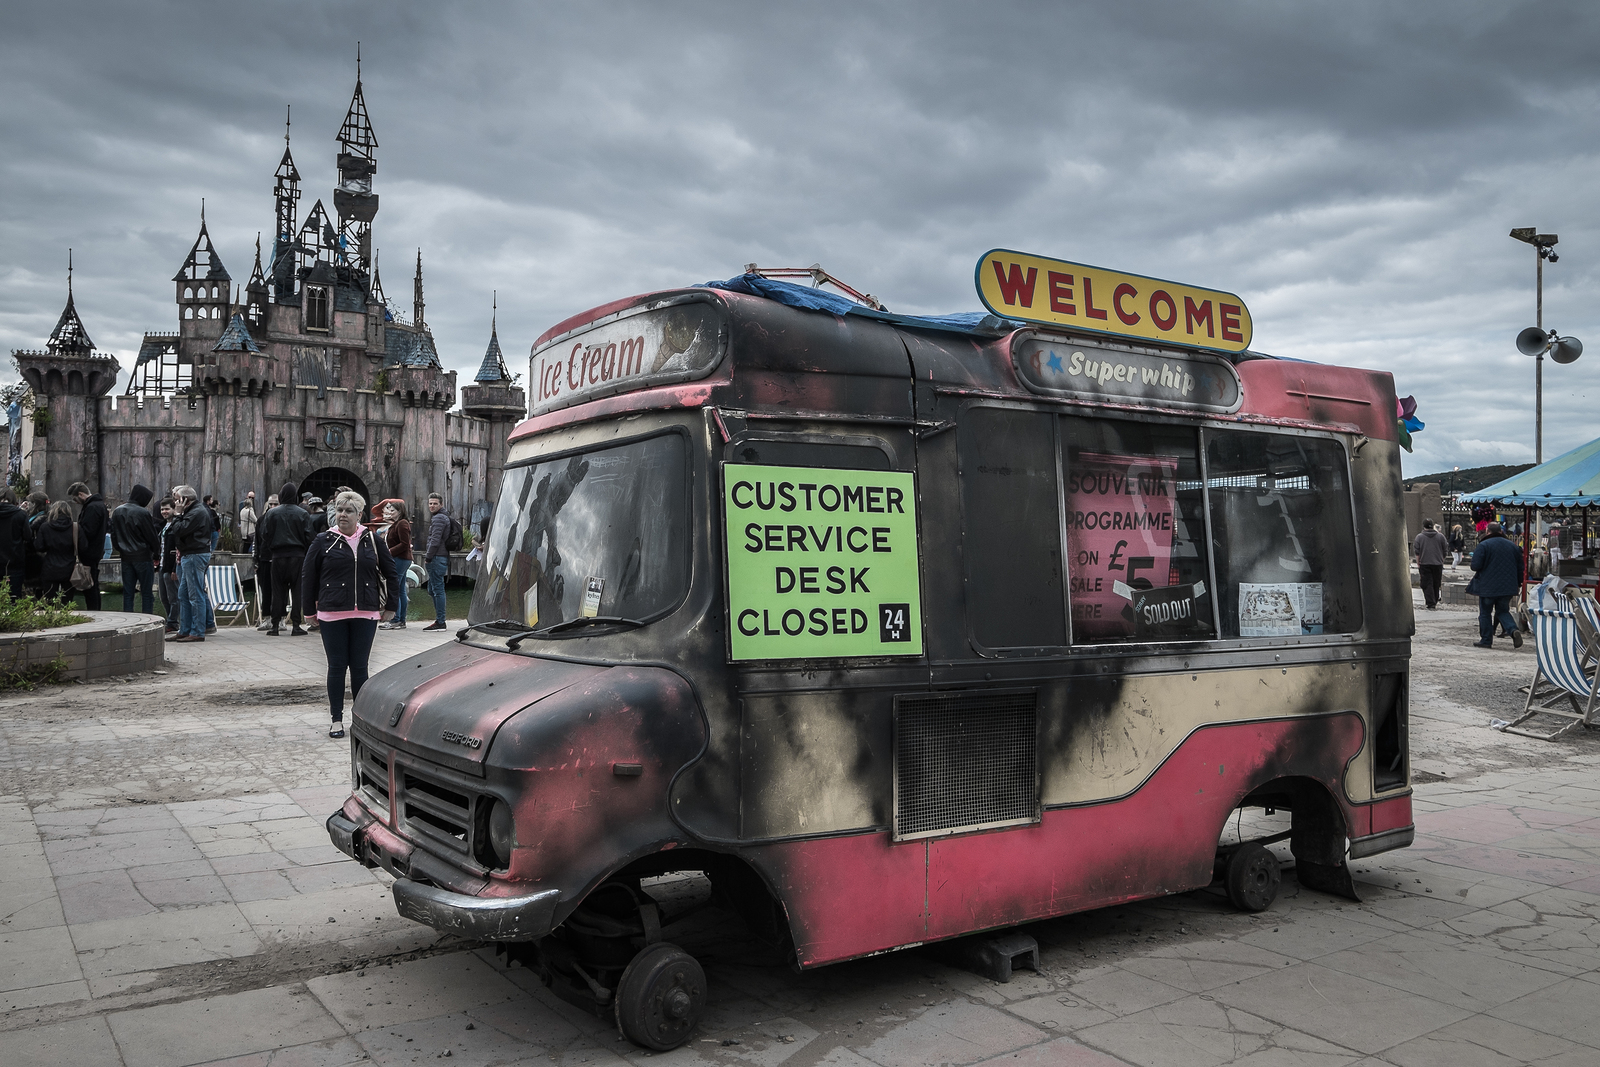 Dismaland — An Apocalyptic Bemusement Park by Banksy